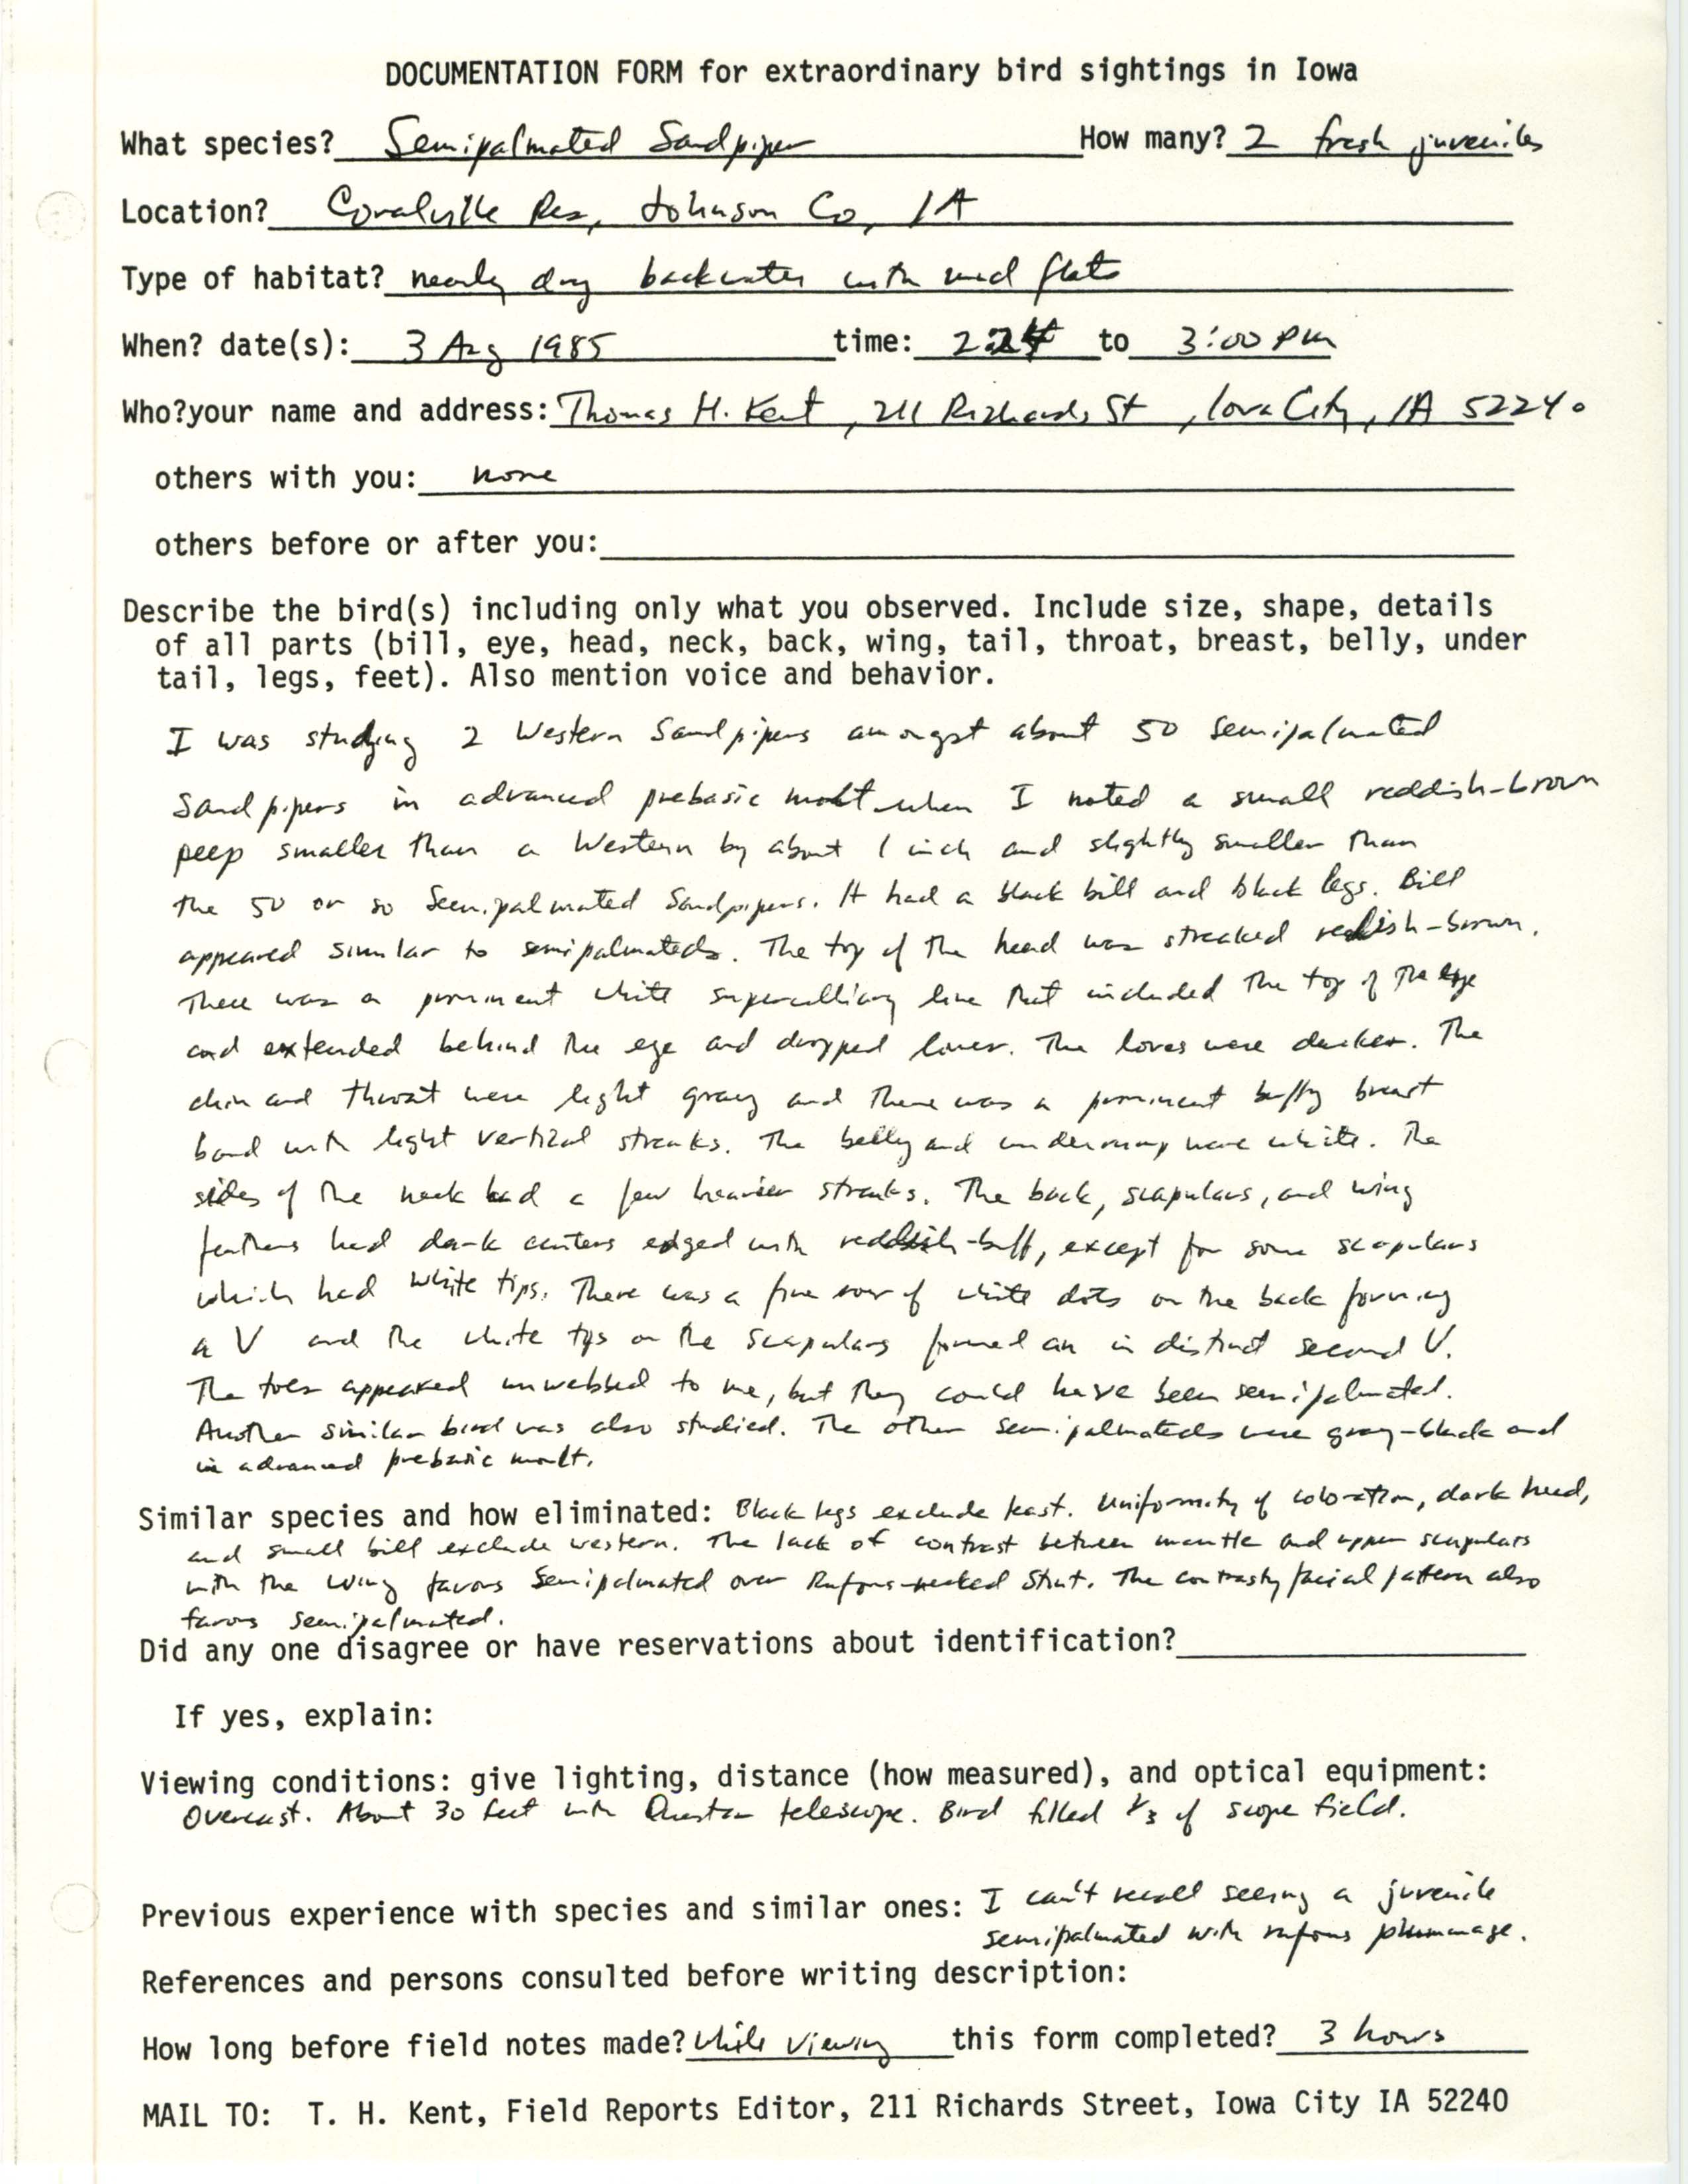 Rare bird documentation form for Semipalmated Sandpiper at Coralville Reservoir, 1985